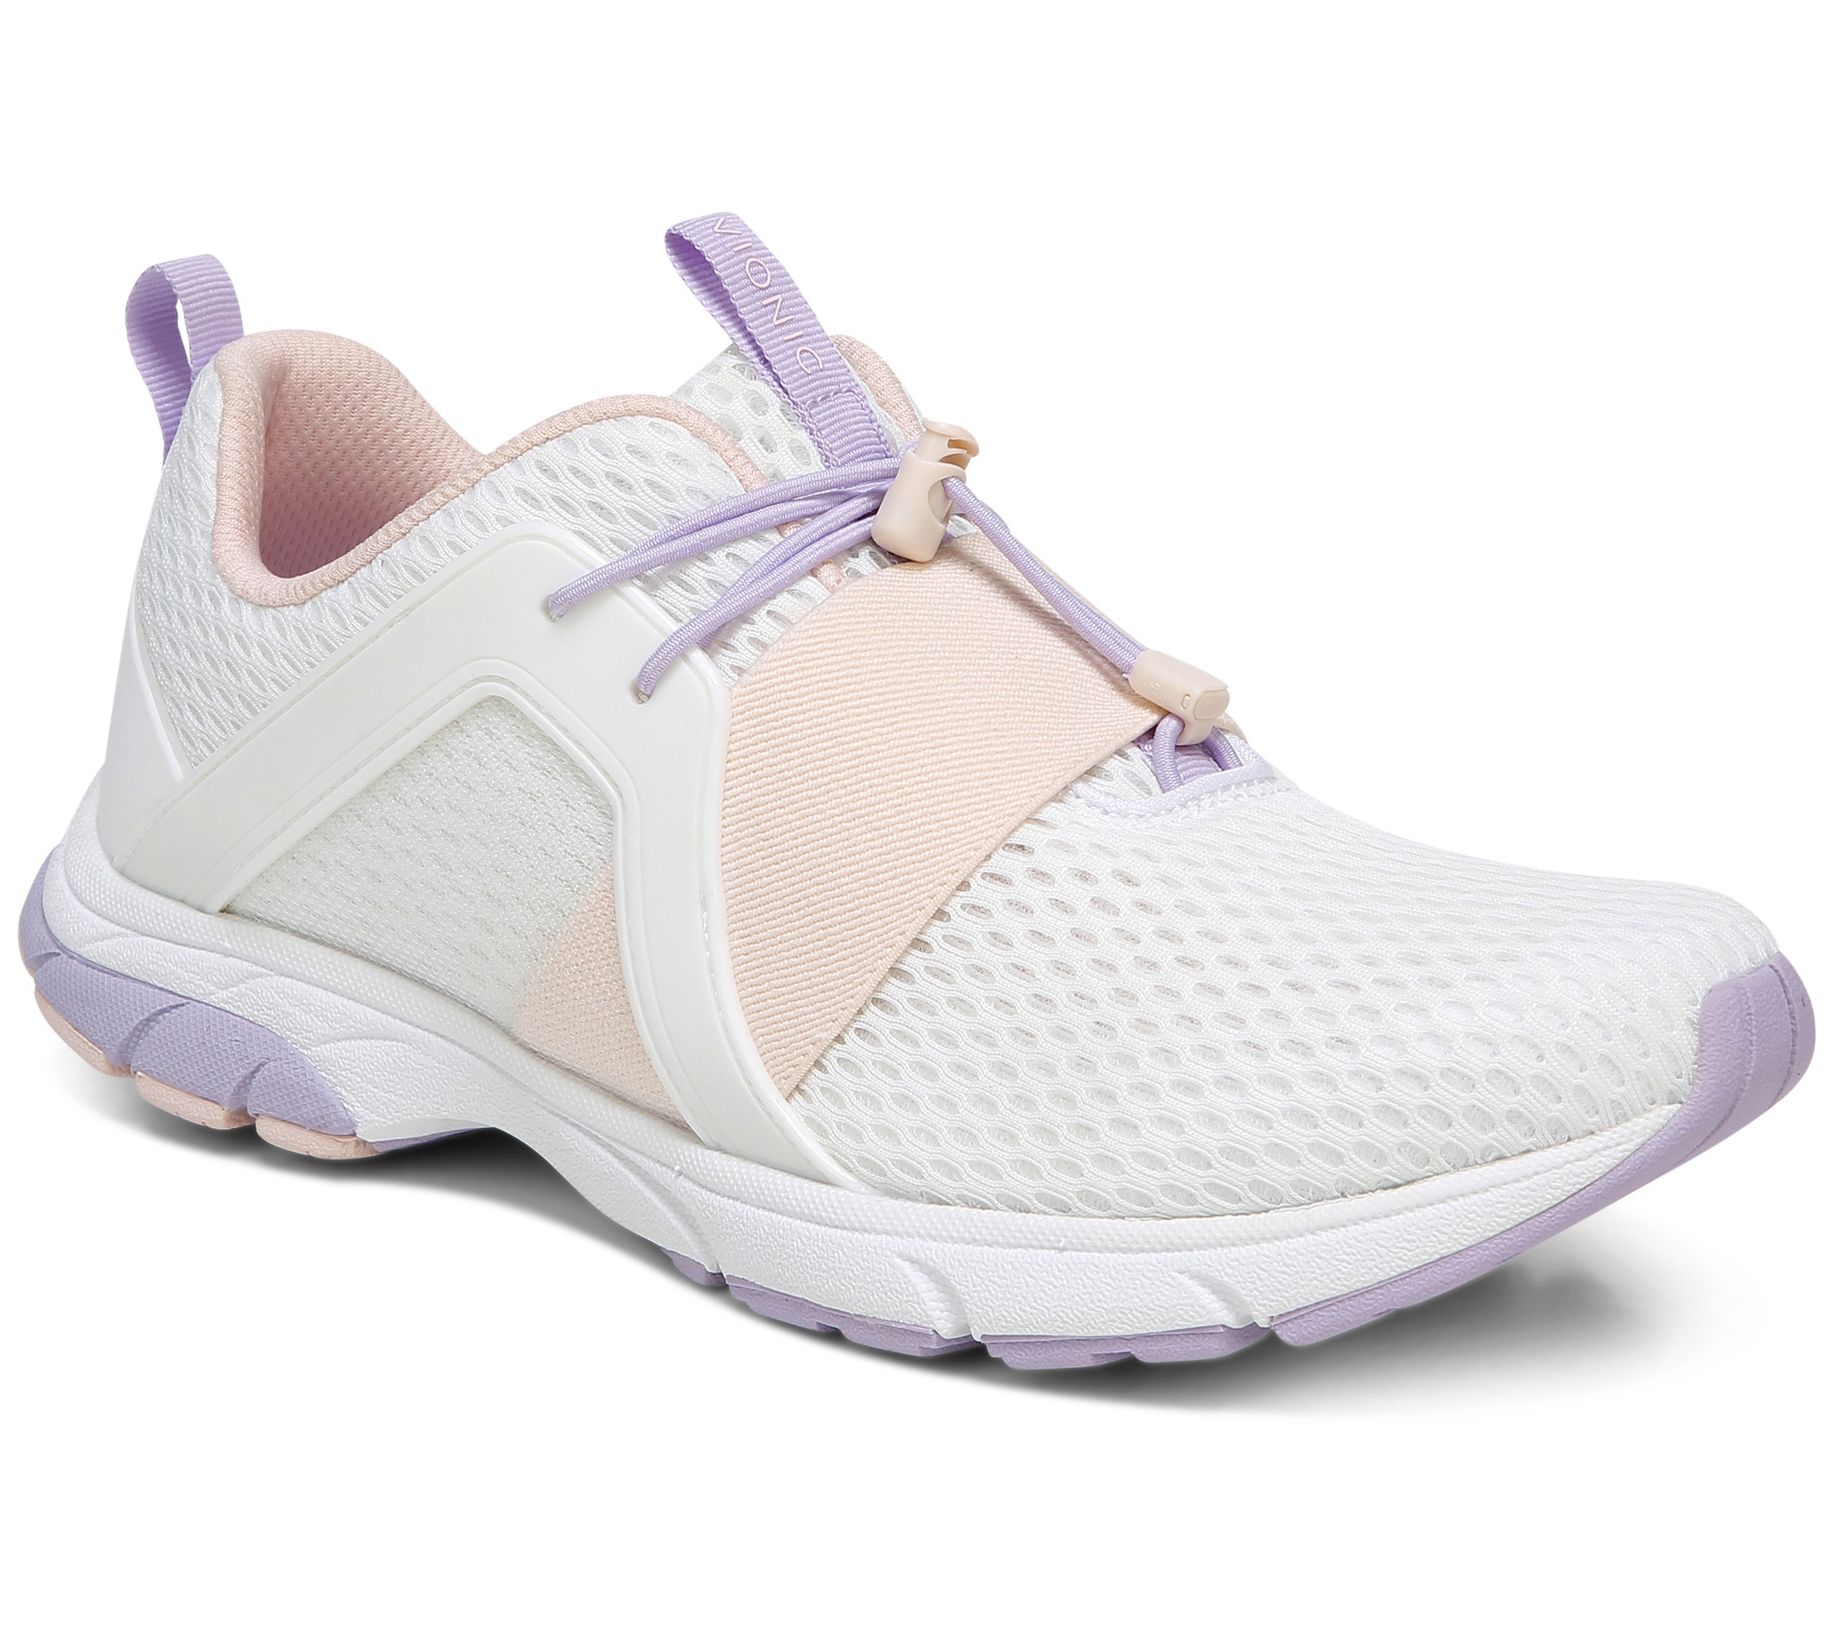 gips sværge Trampe Vionic Mesh Sneakers with Bungee Closure - Berlin - QVC.com